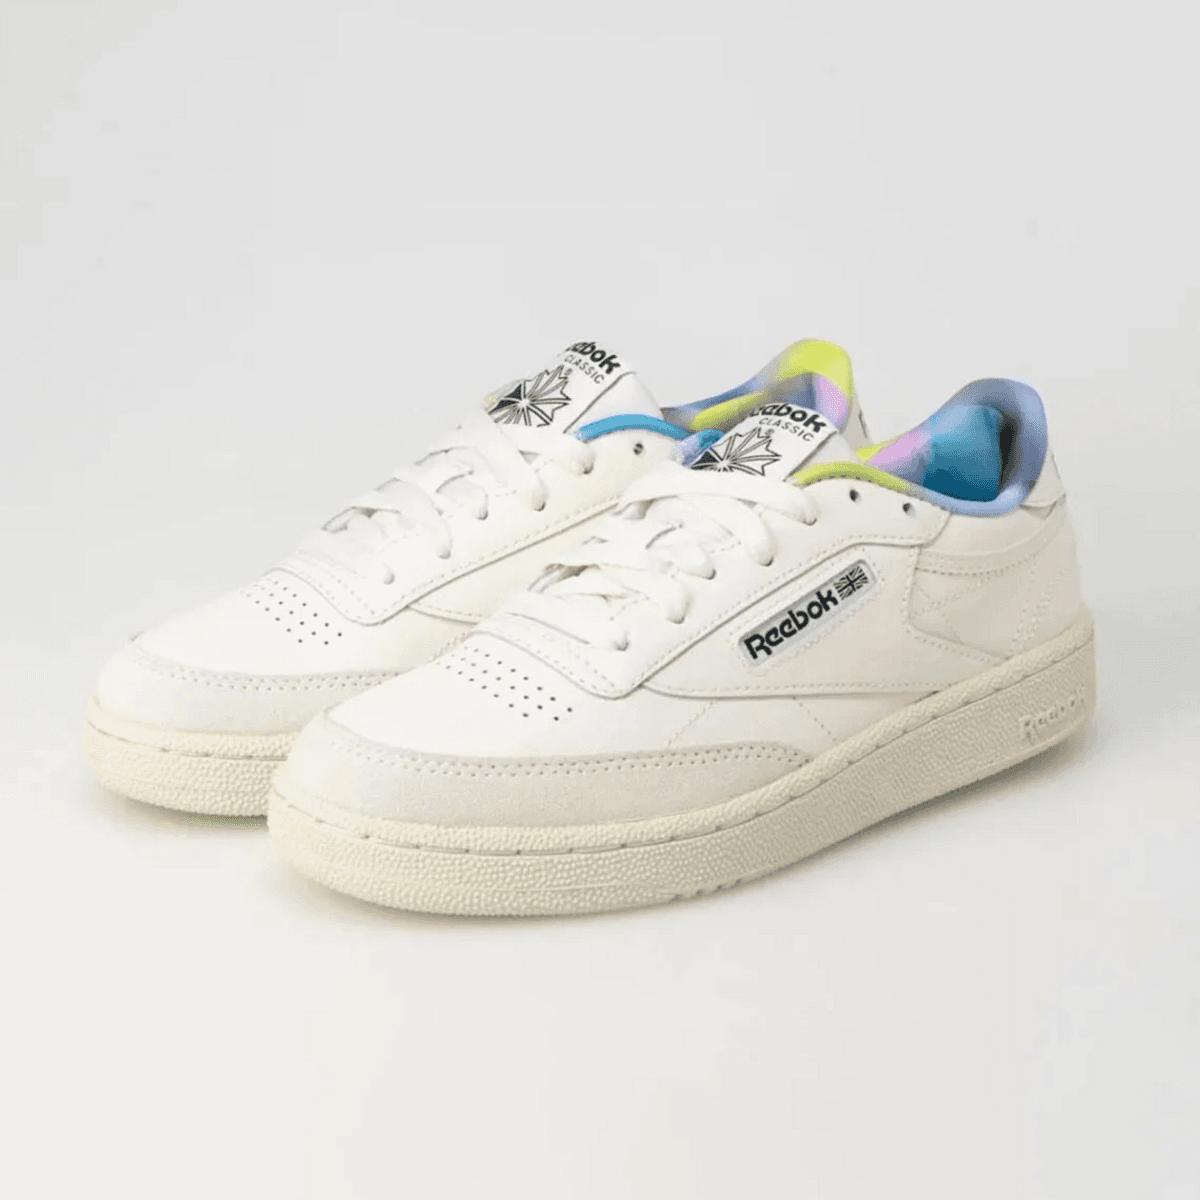 Reebok Club C Might Make You Want To Hide With The Easter Eggs